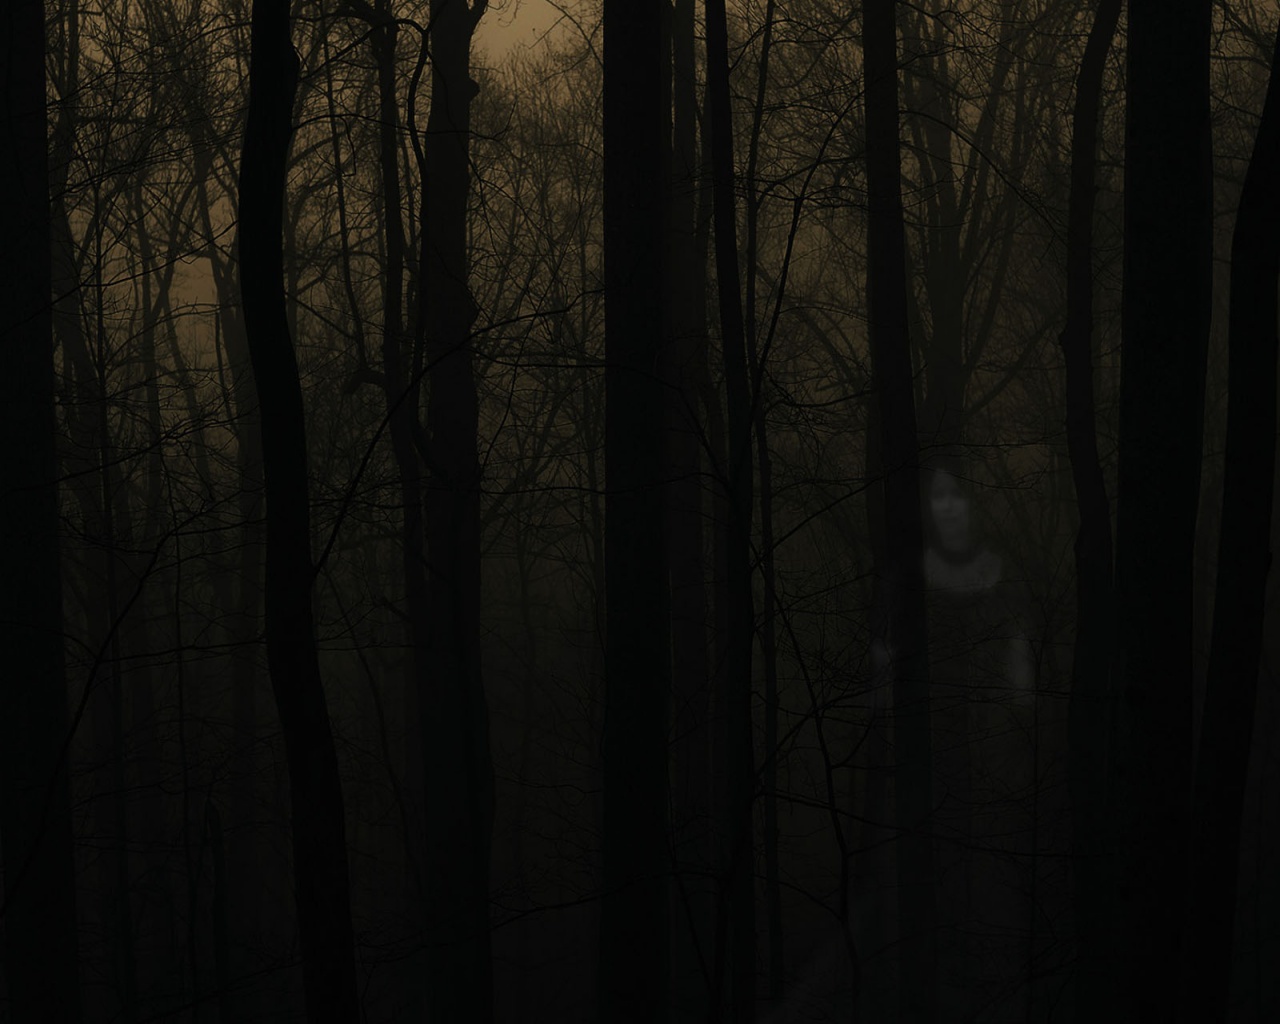 A person standing in the woods with fog - Woods